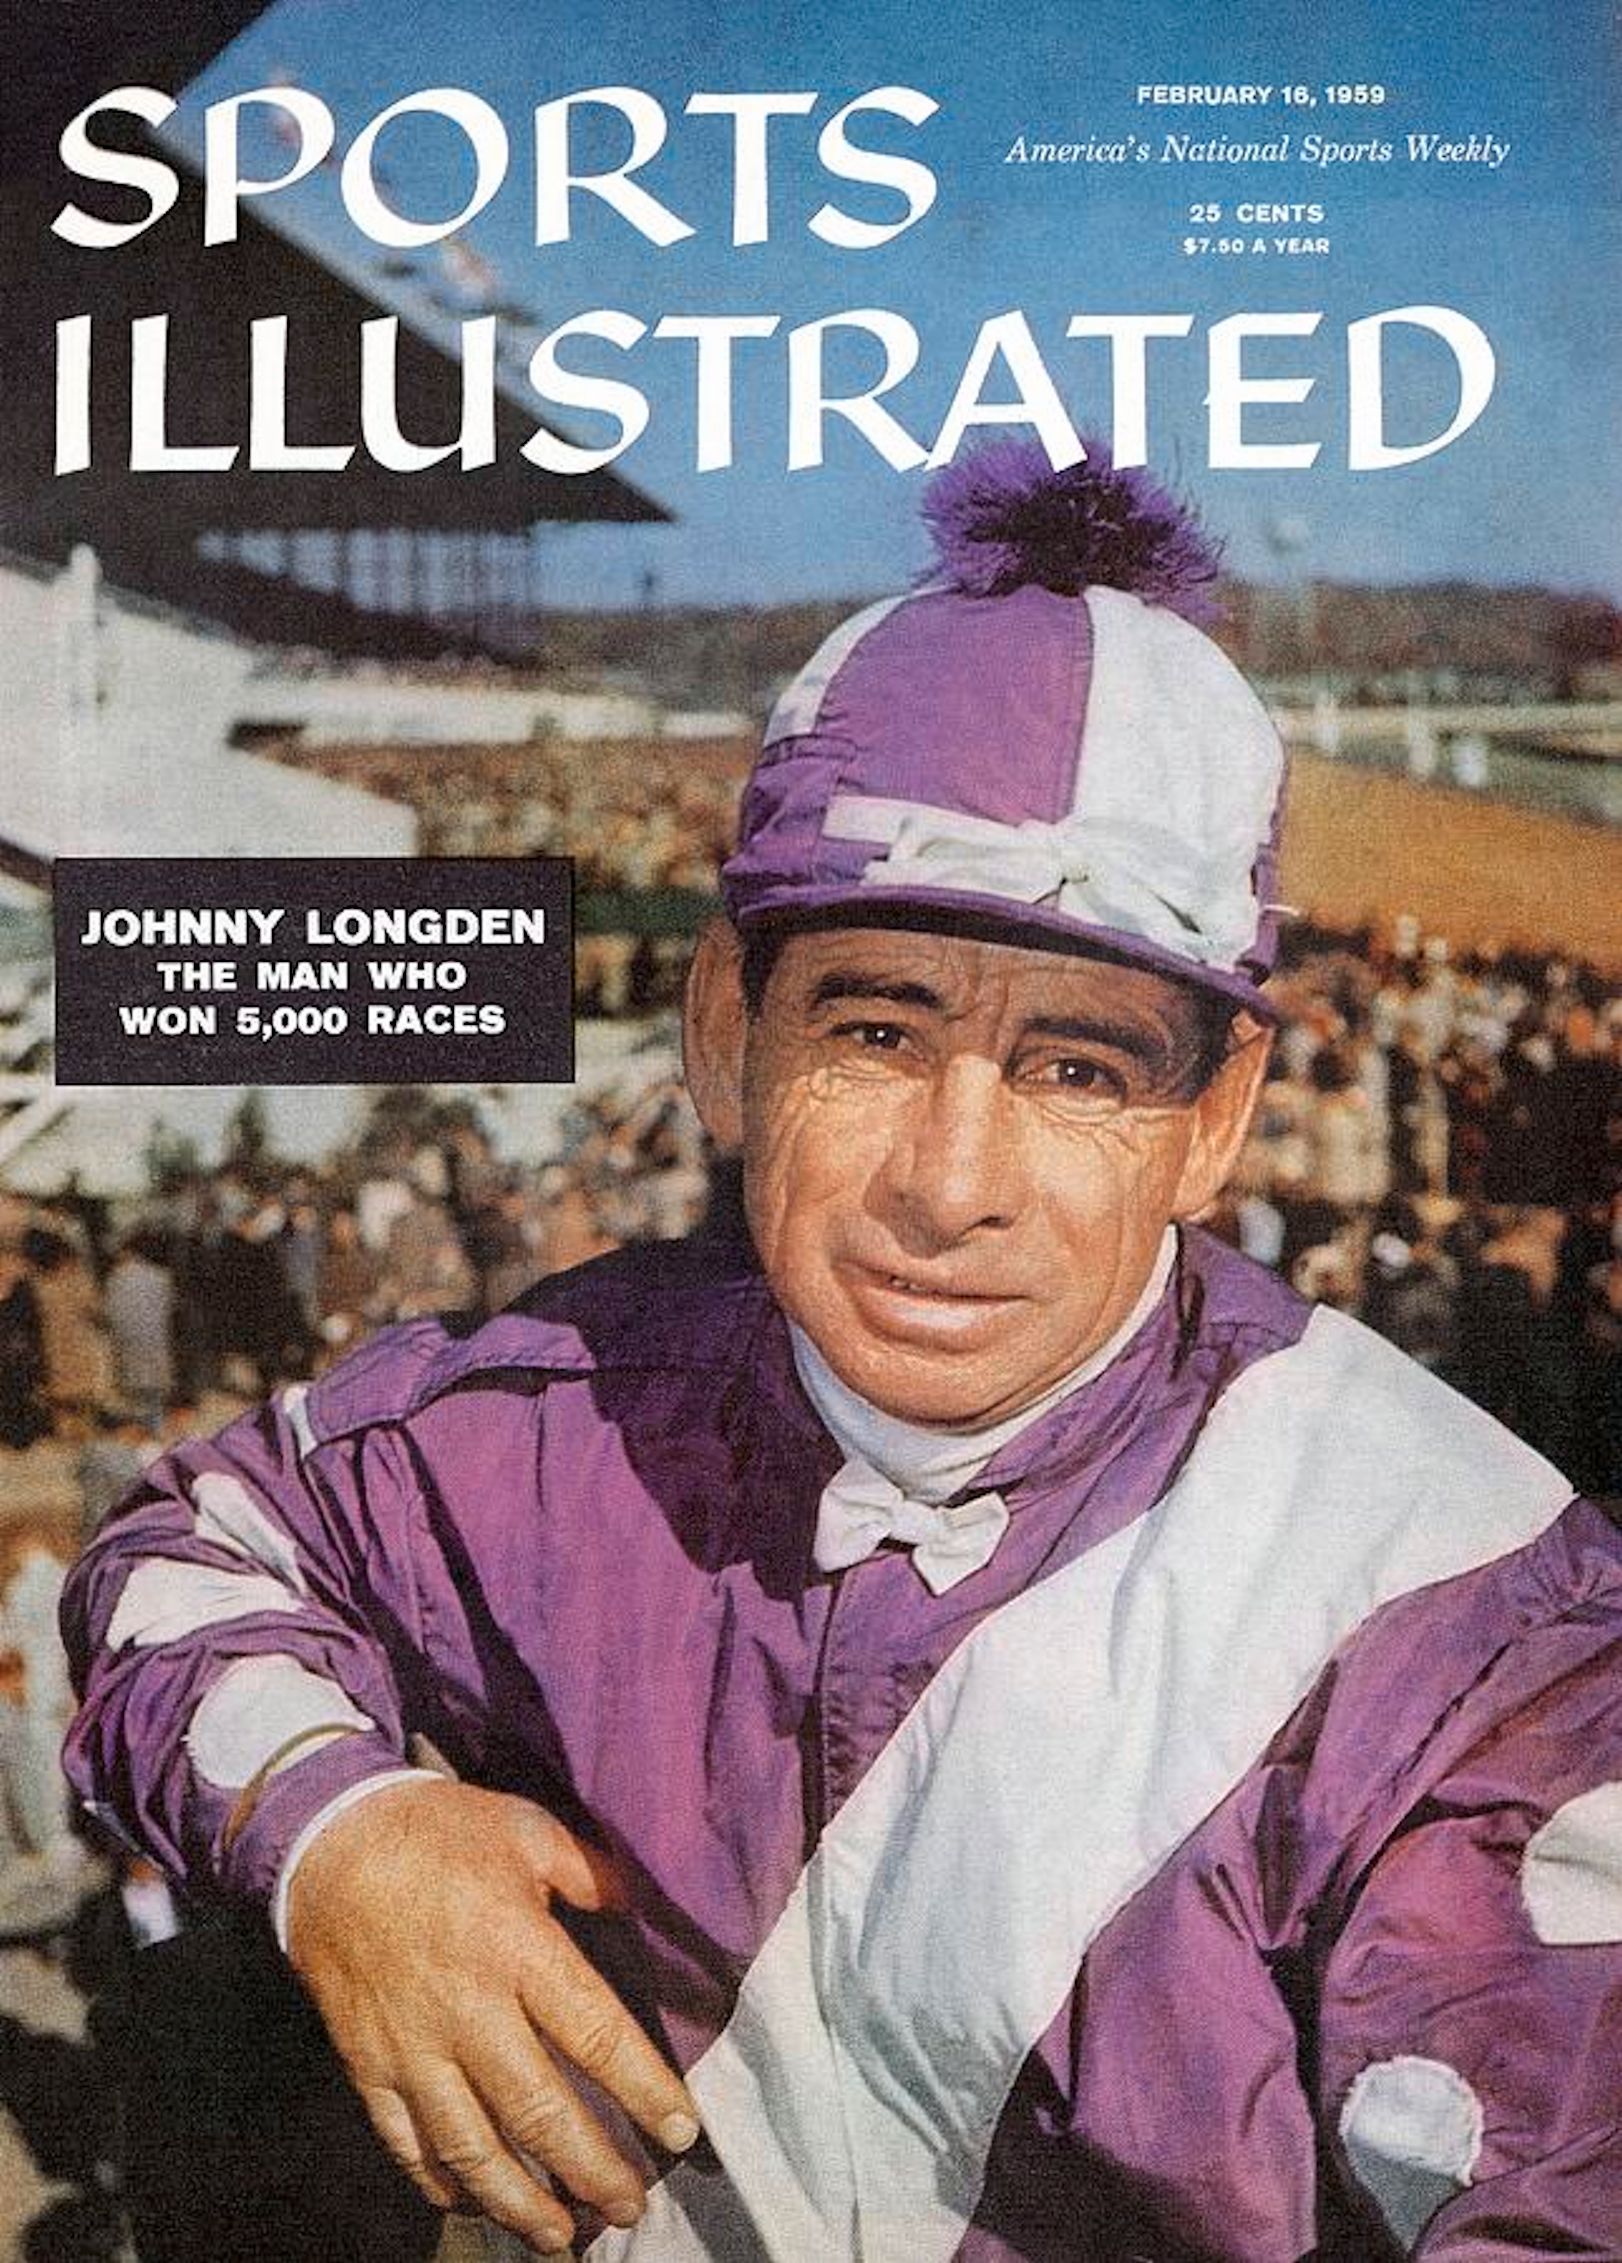 Johnny Longden on the cover of "Sports Illustrated" in 1959 (Sports Illustrated)